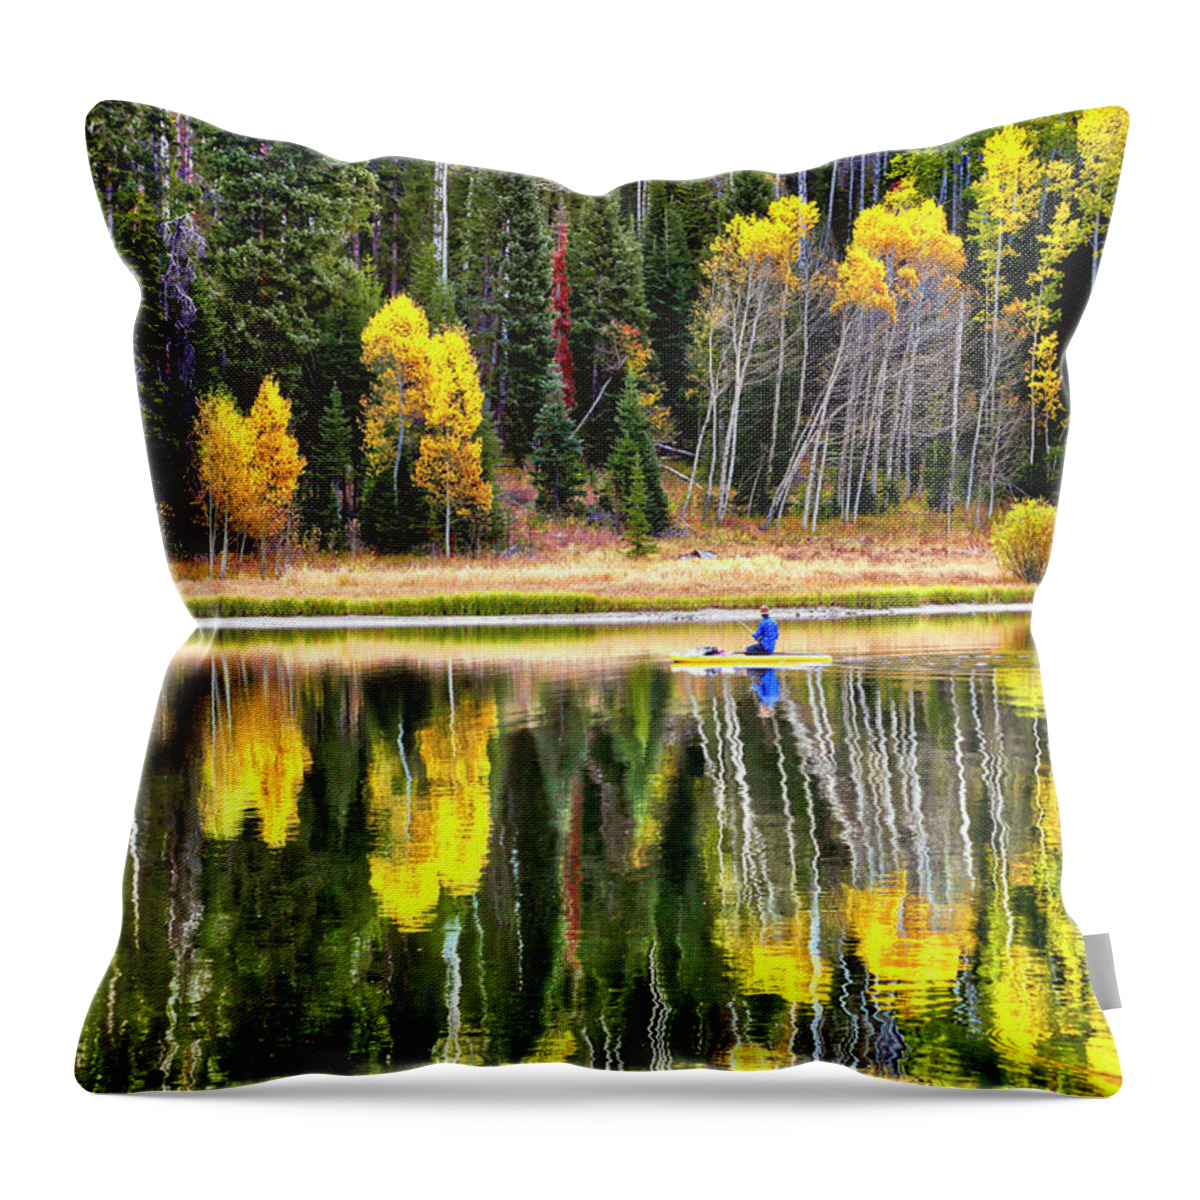 Landscape Throw Pillow featuring the photograph Fishing On Dream Lake Colorado by James Steele